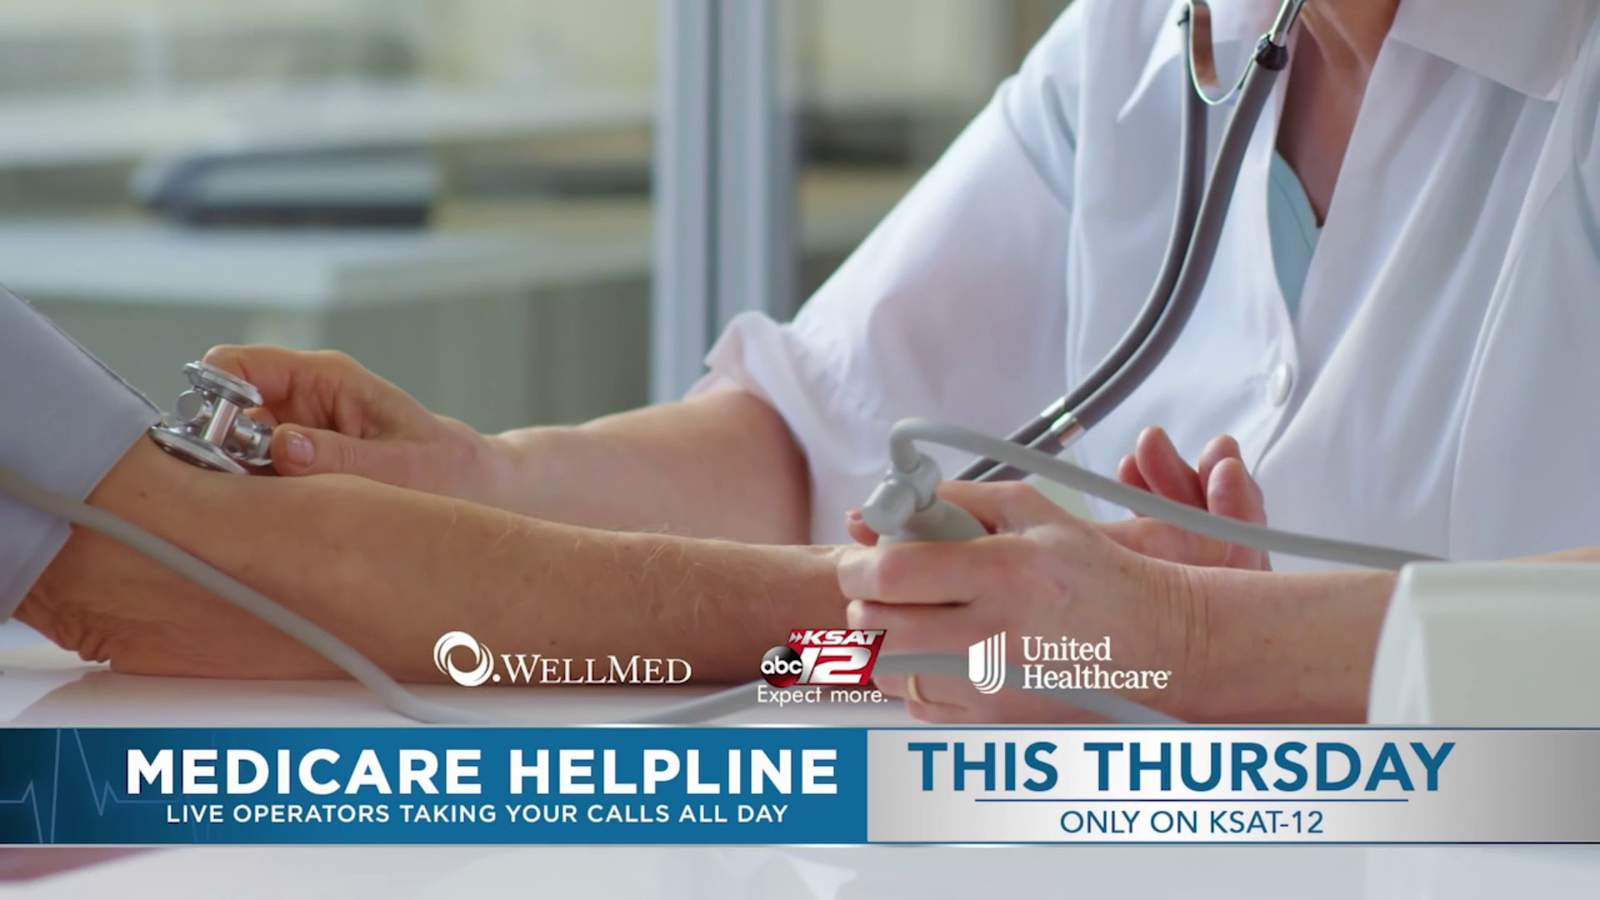 KSAT12 to host virtual phone bank with WellMed and United Healthcare Thursday